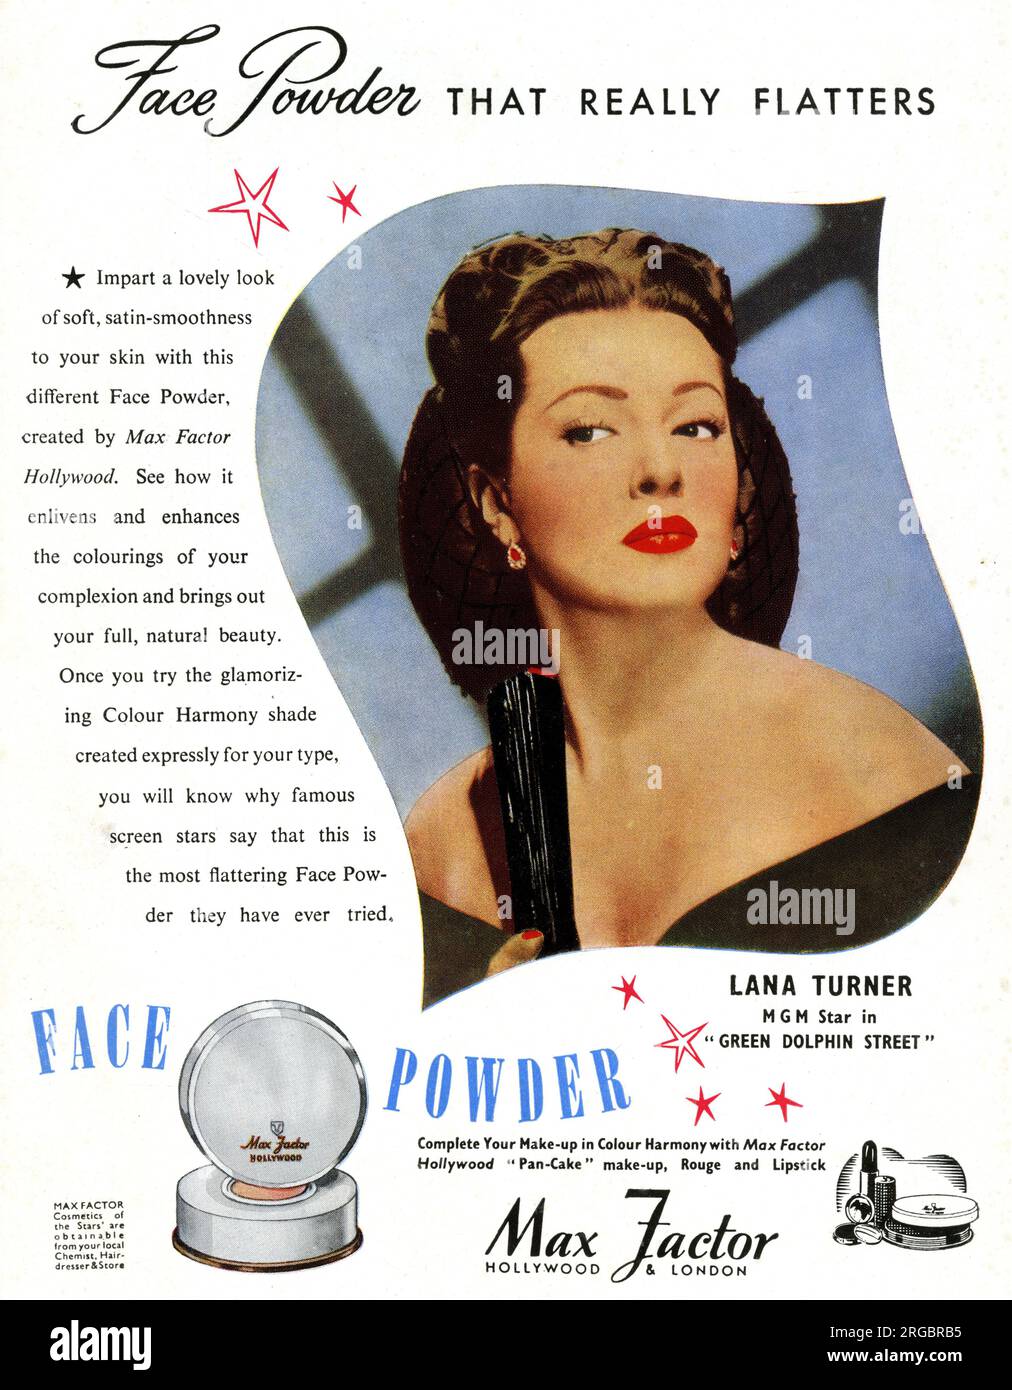 Advert for Max Factor face powder, as worn by Lana Turner, MGM film star in Green Dolphin Street Stock Photo